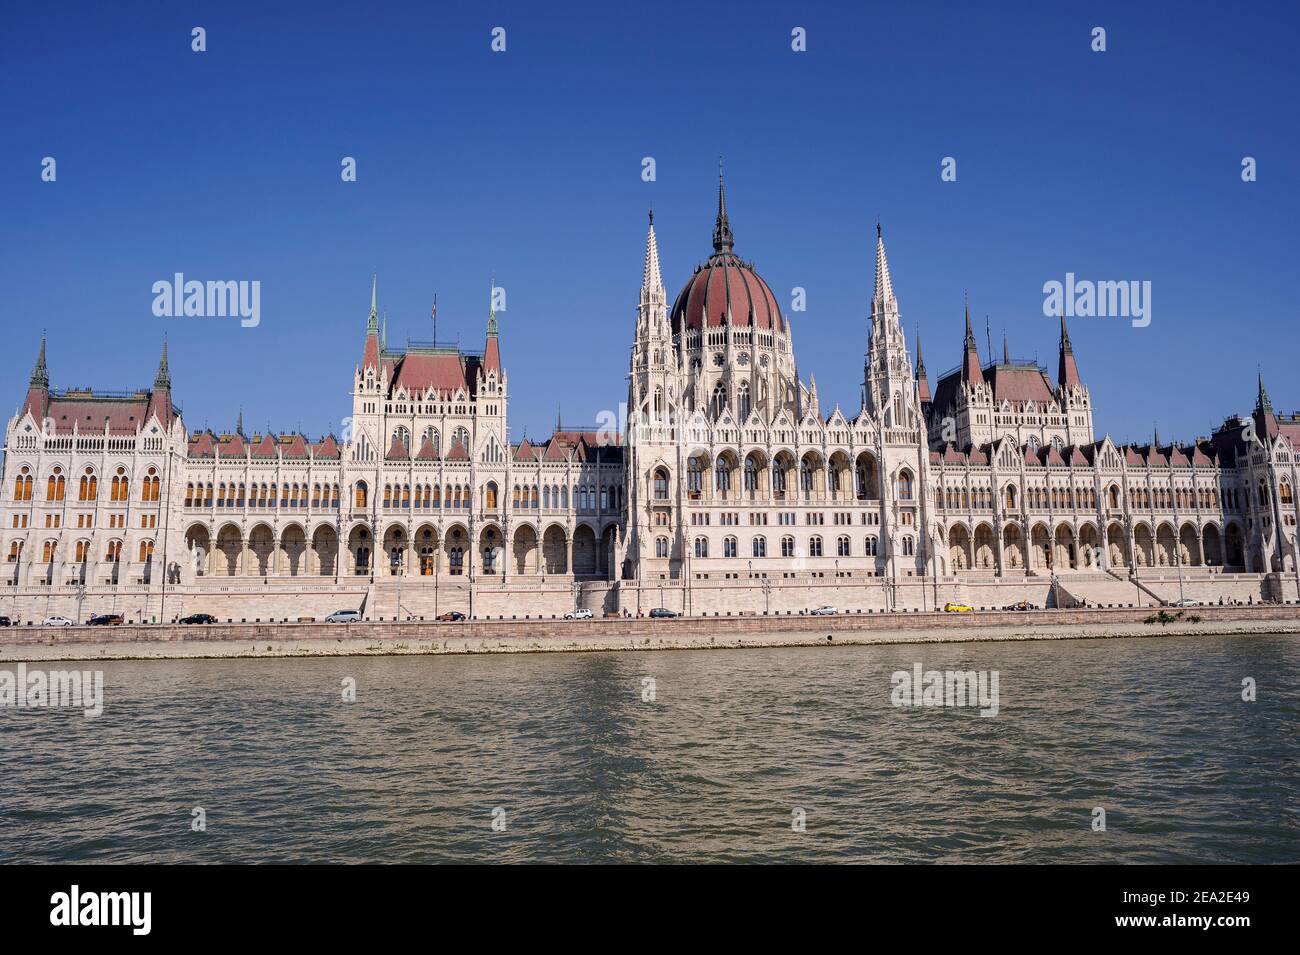 Parliament of Hungary in Budapest - The impressive Hungarian Parliament building on the left bank of the Danube. Stock Photo